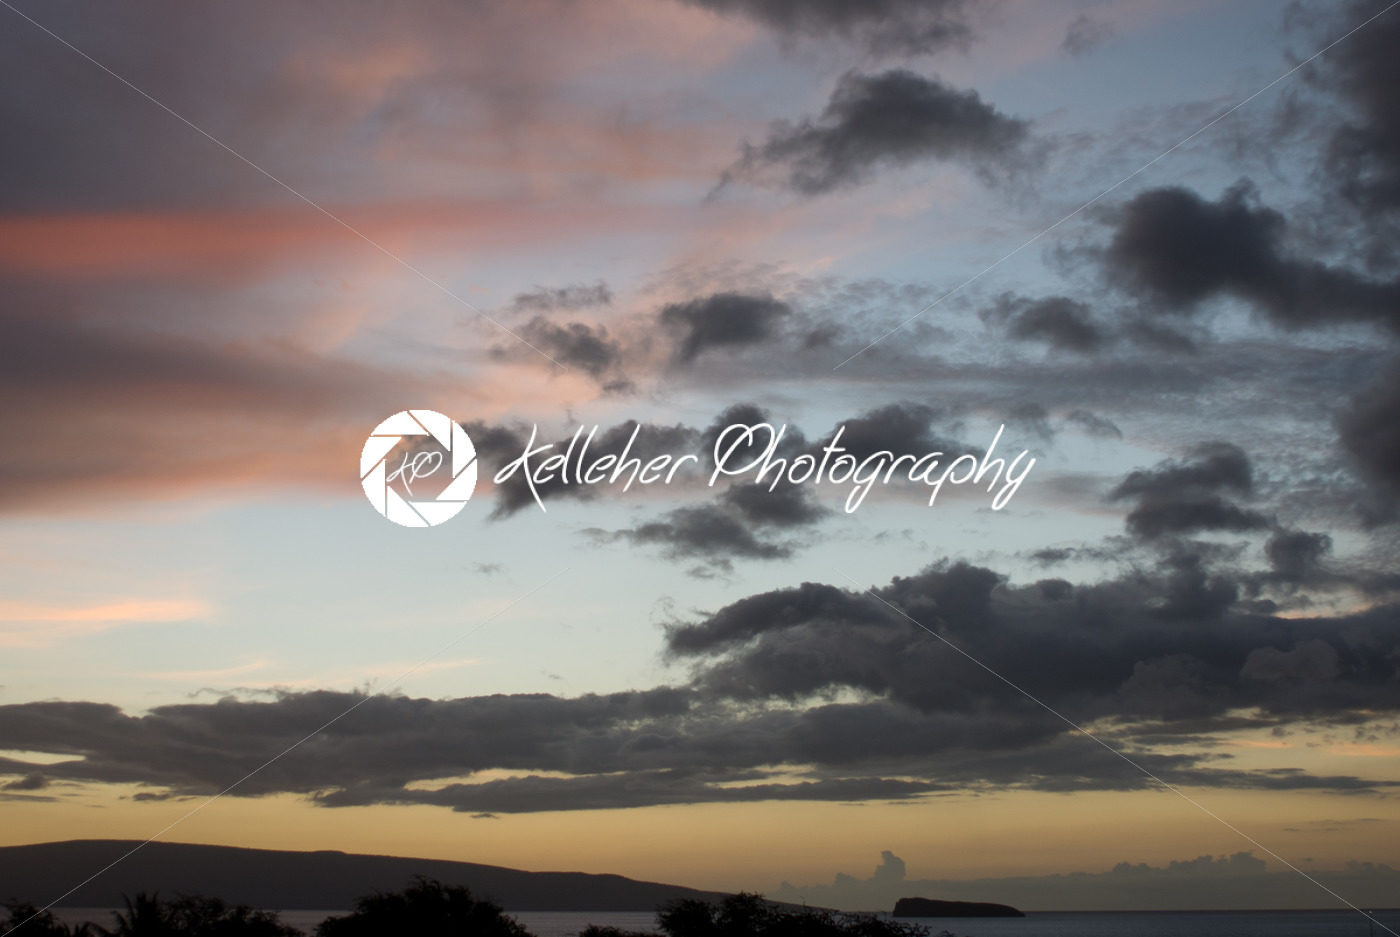 Tropical Sunset over beach in Maui Hawaii - Kelleher Photography Store